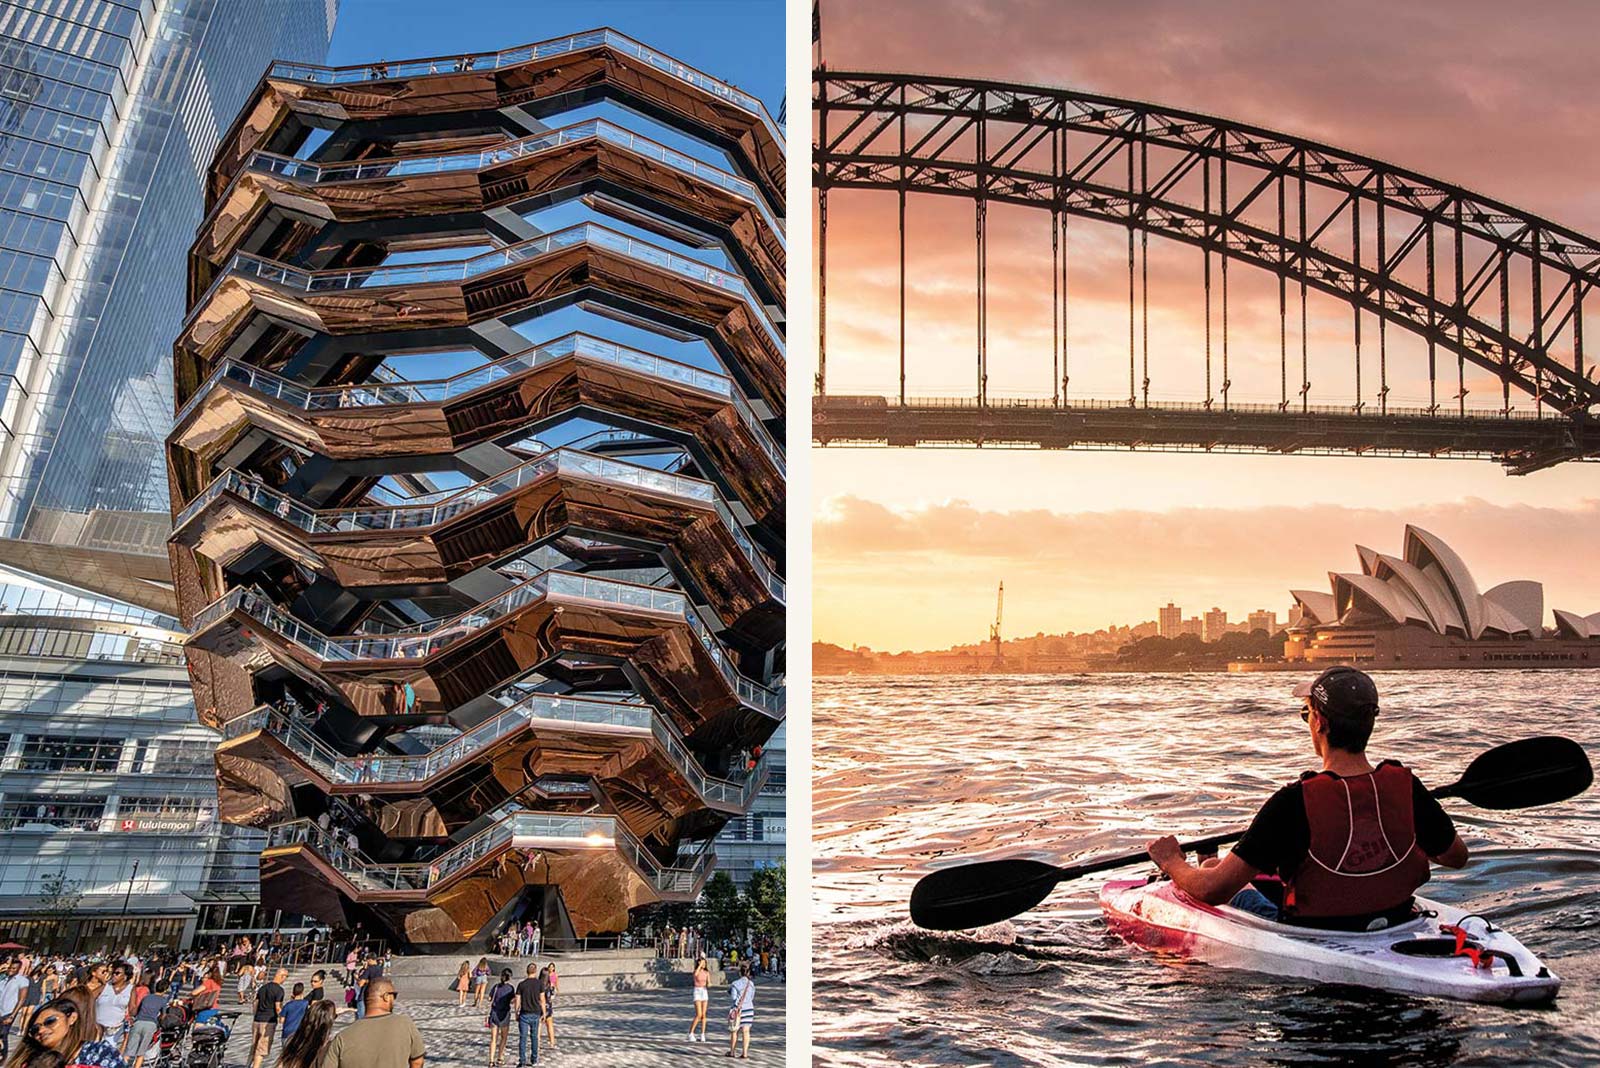 Hudson Yards in New York, United States and Sydney by Kayak in Australia